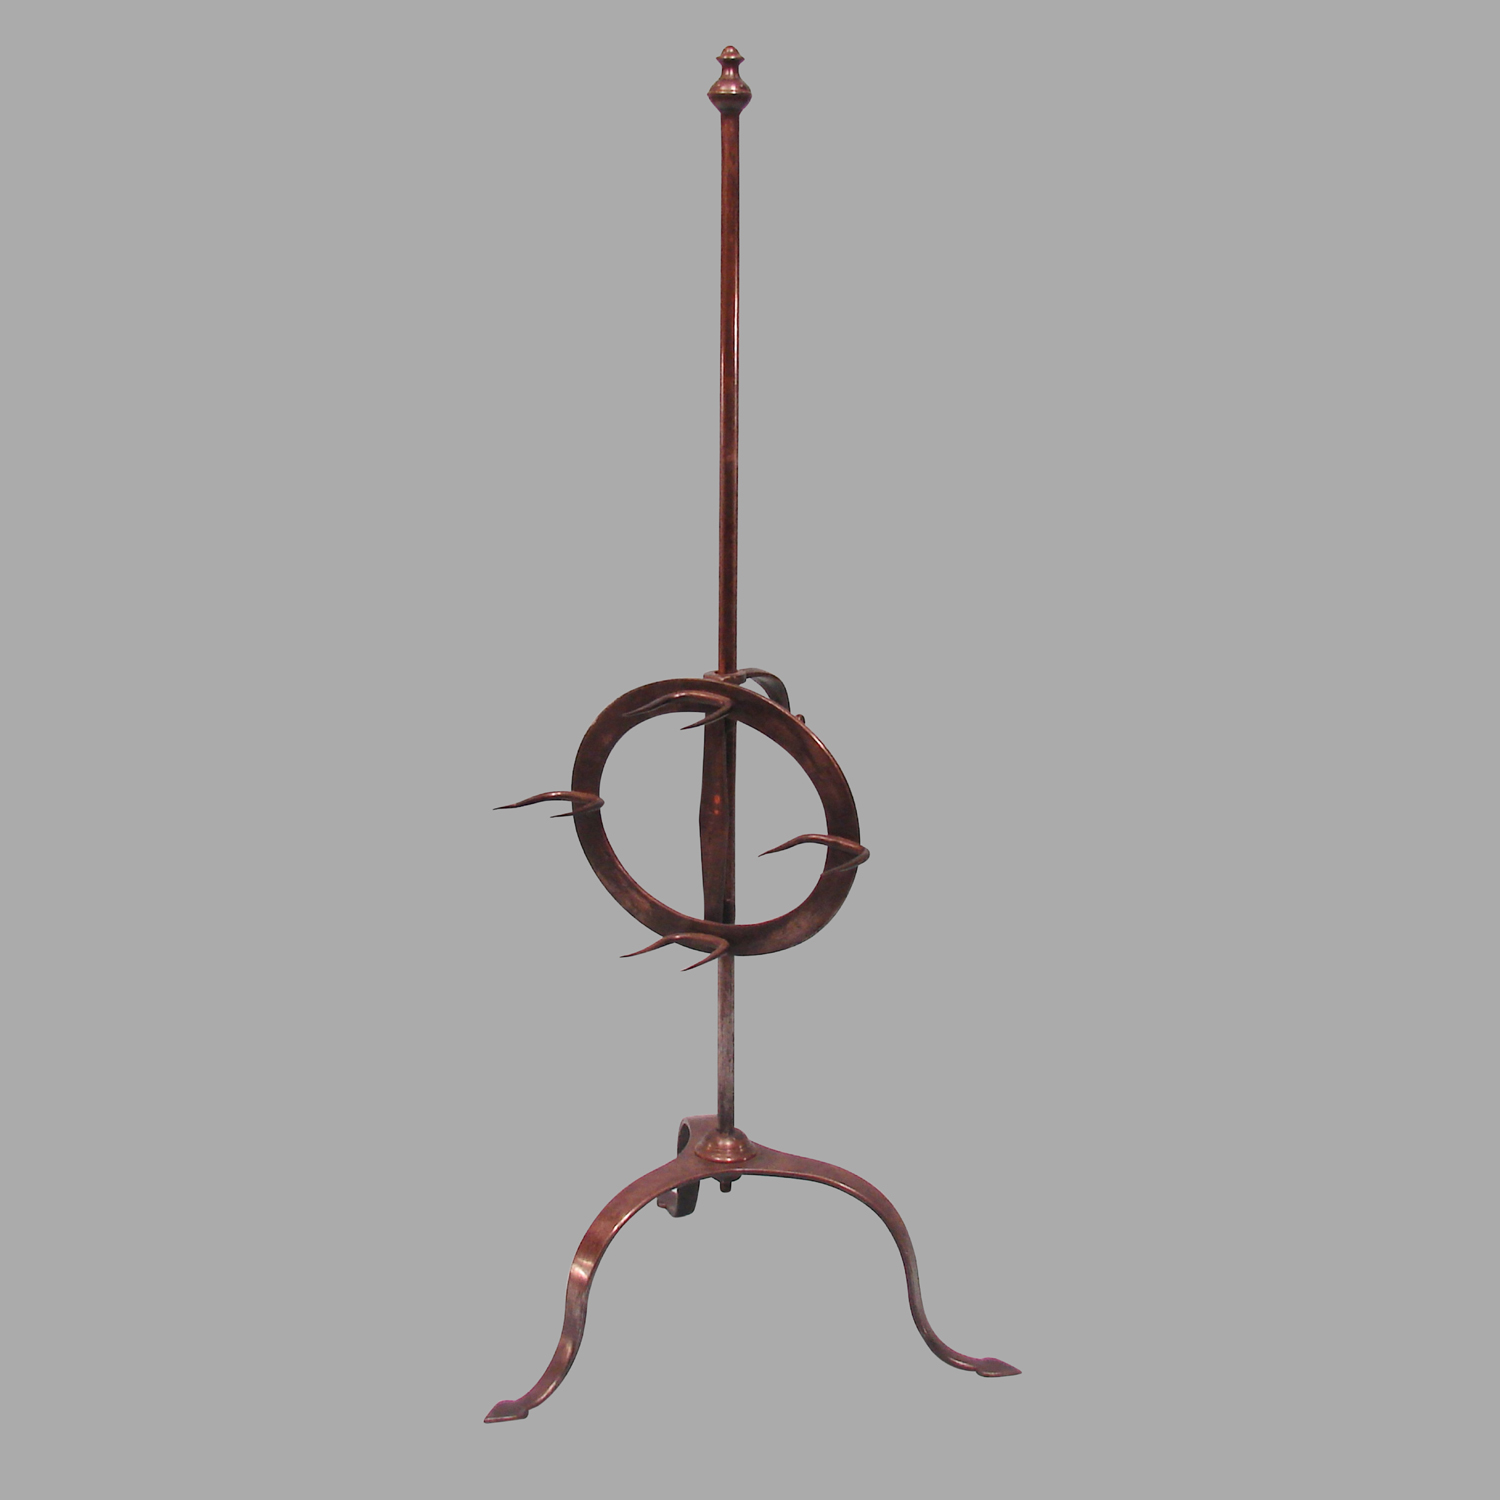 steel-wrought-iron-adjustable-fireplace-spit-a1212-2b